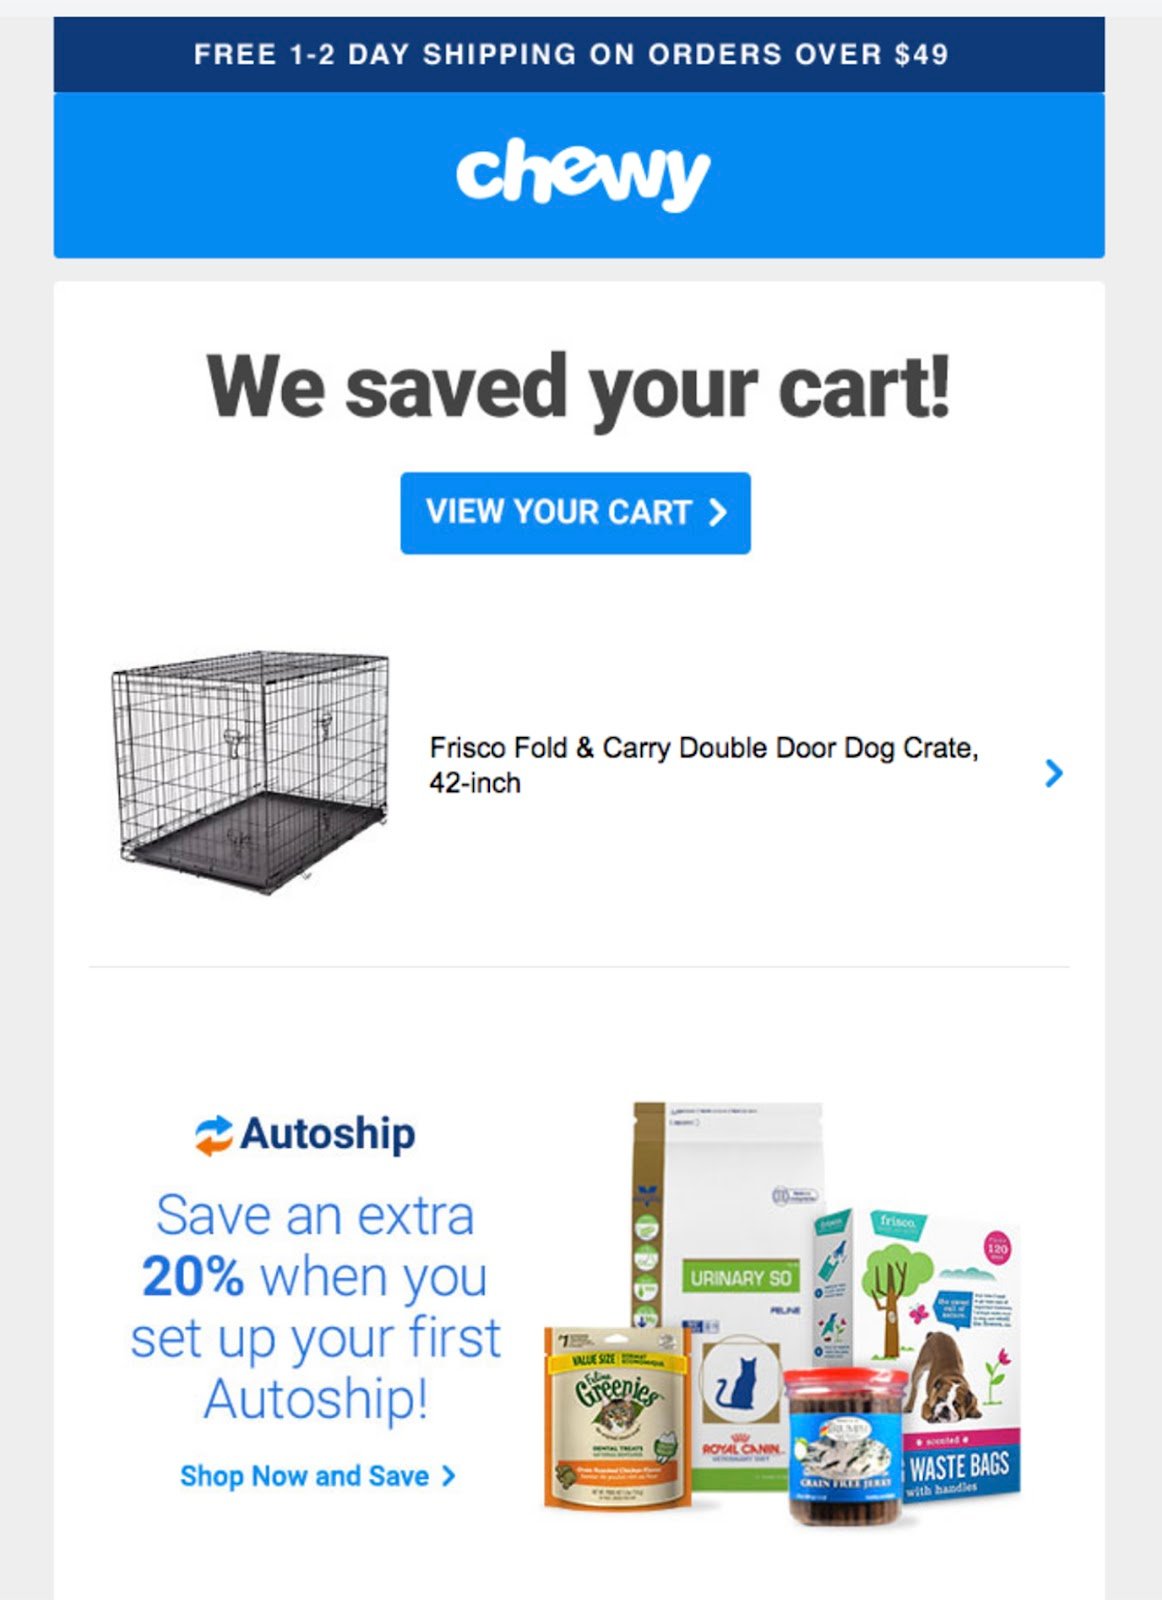 Abandoned cart email - chewy